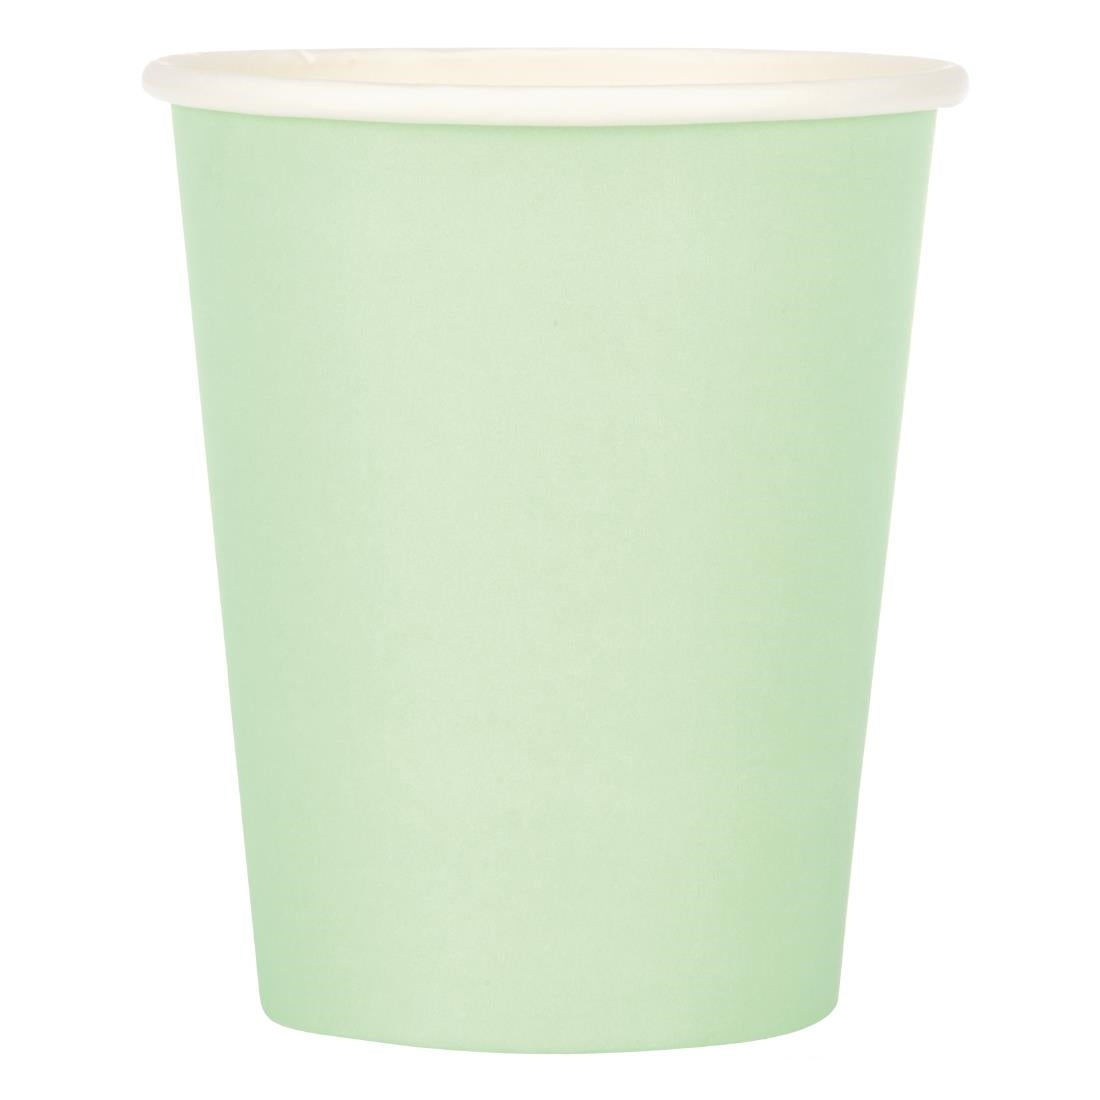 GP403 Fiesta Disposable Coffee Cups Single Wall Turquoise 225ml / 8oz (Pack of 1000) JD Catering Equipment Solutions Ltd